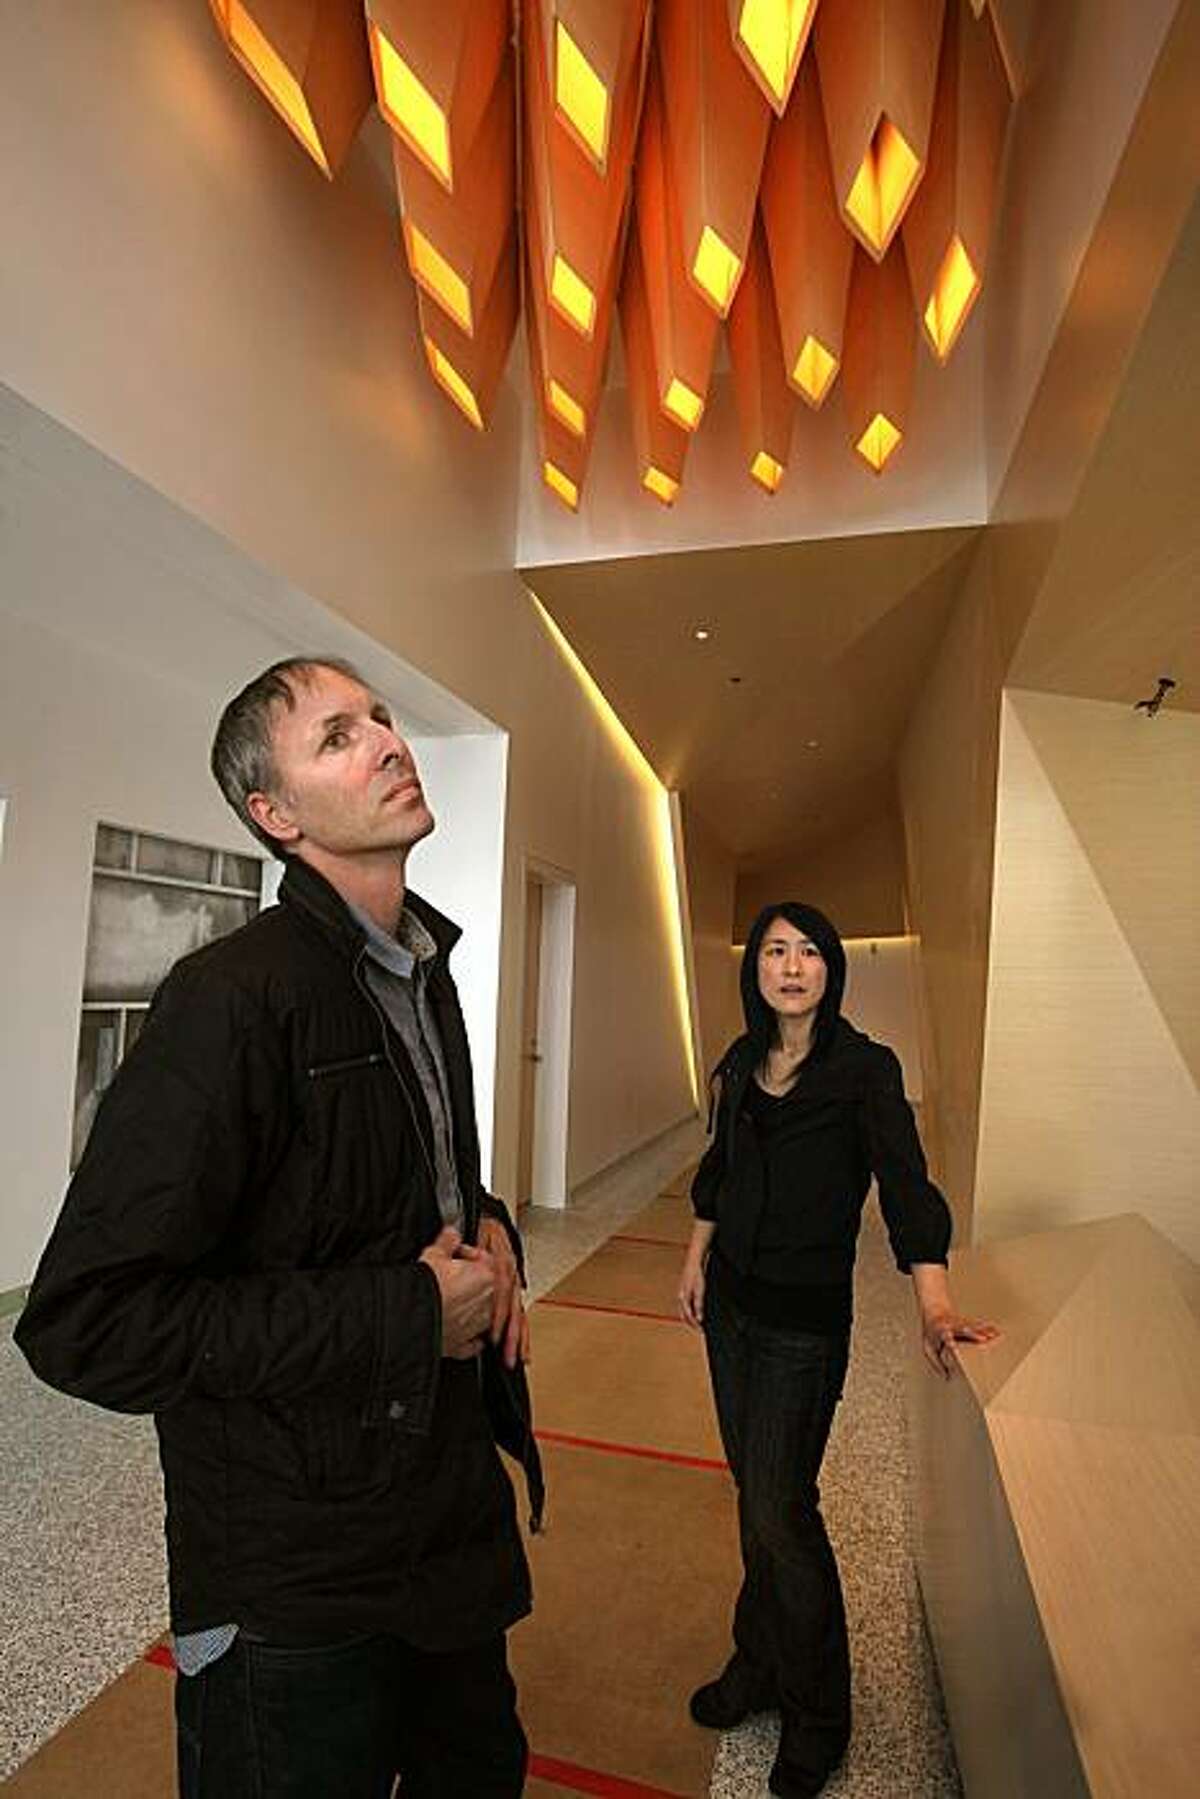 Architects Craig Scott and Lisa Iwamoto have handmade coffered overhead lighting, a custom made desk, and custom made walls with recess lighting in the lobby of their first downtown San Francisco project in progress at One Kearny on Tuesday, March 23, 2010.